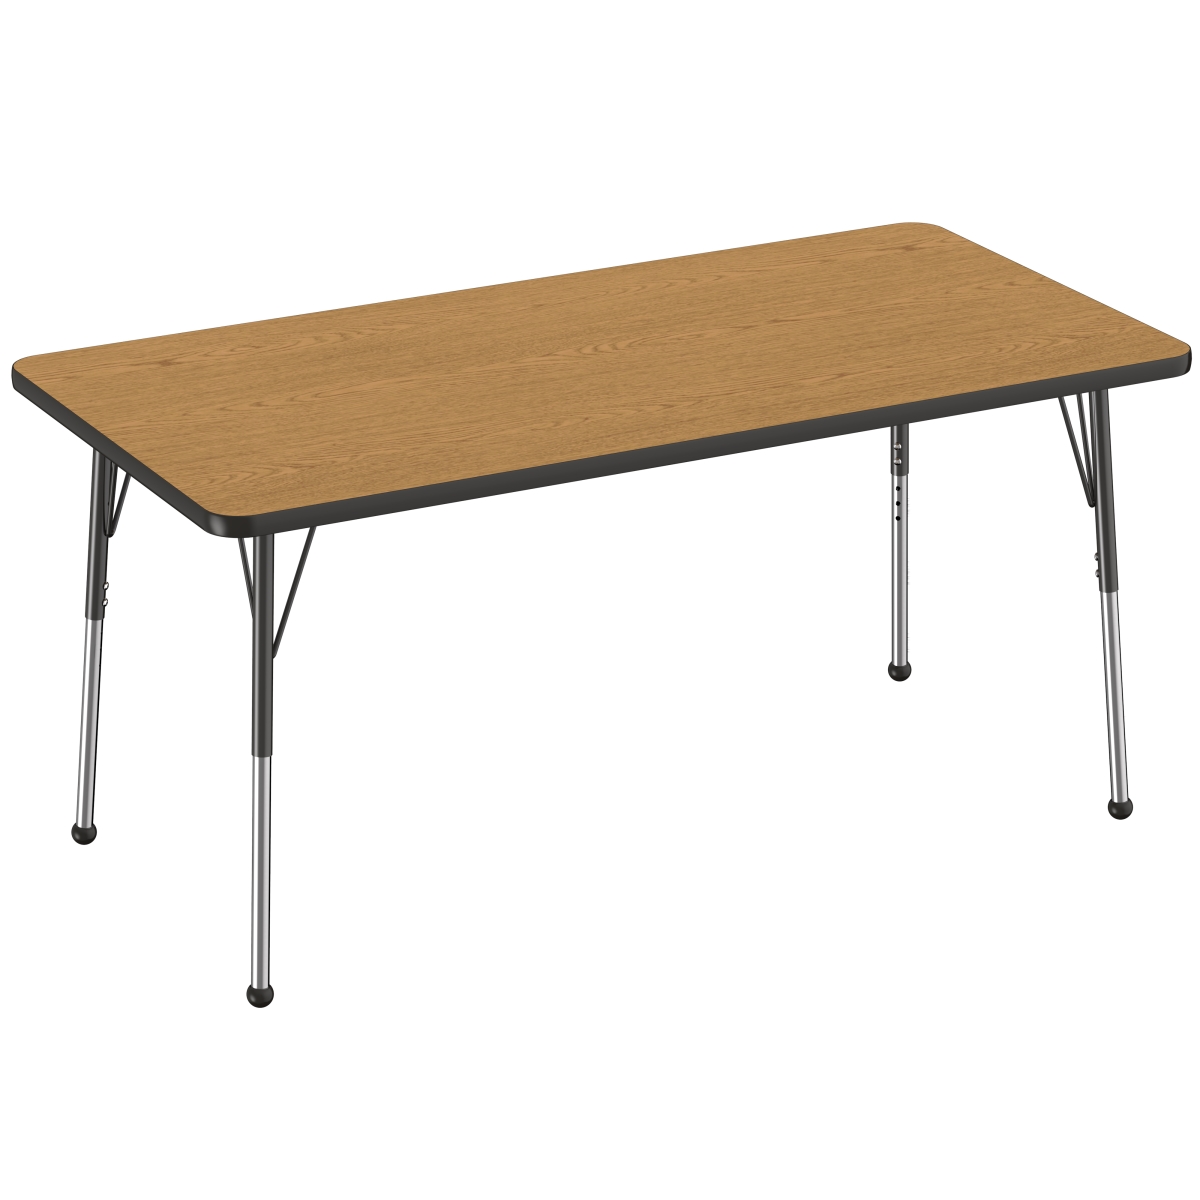 10024-okbk 30 X 60 In. Rectangle T-mold Adjustable Activity Table With Standard Ball - Oak & Black